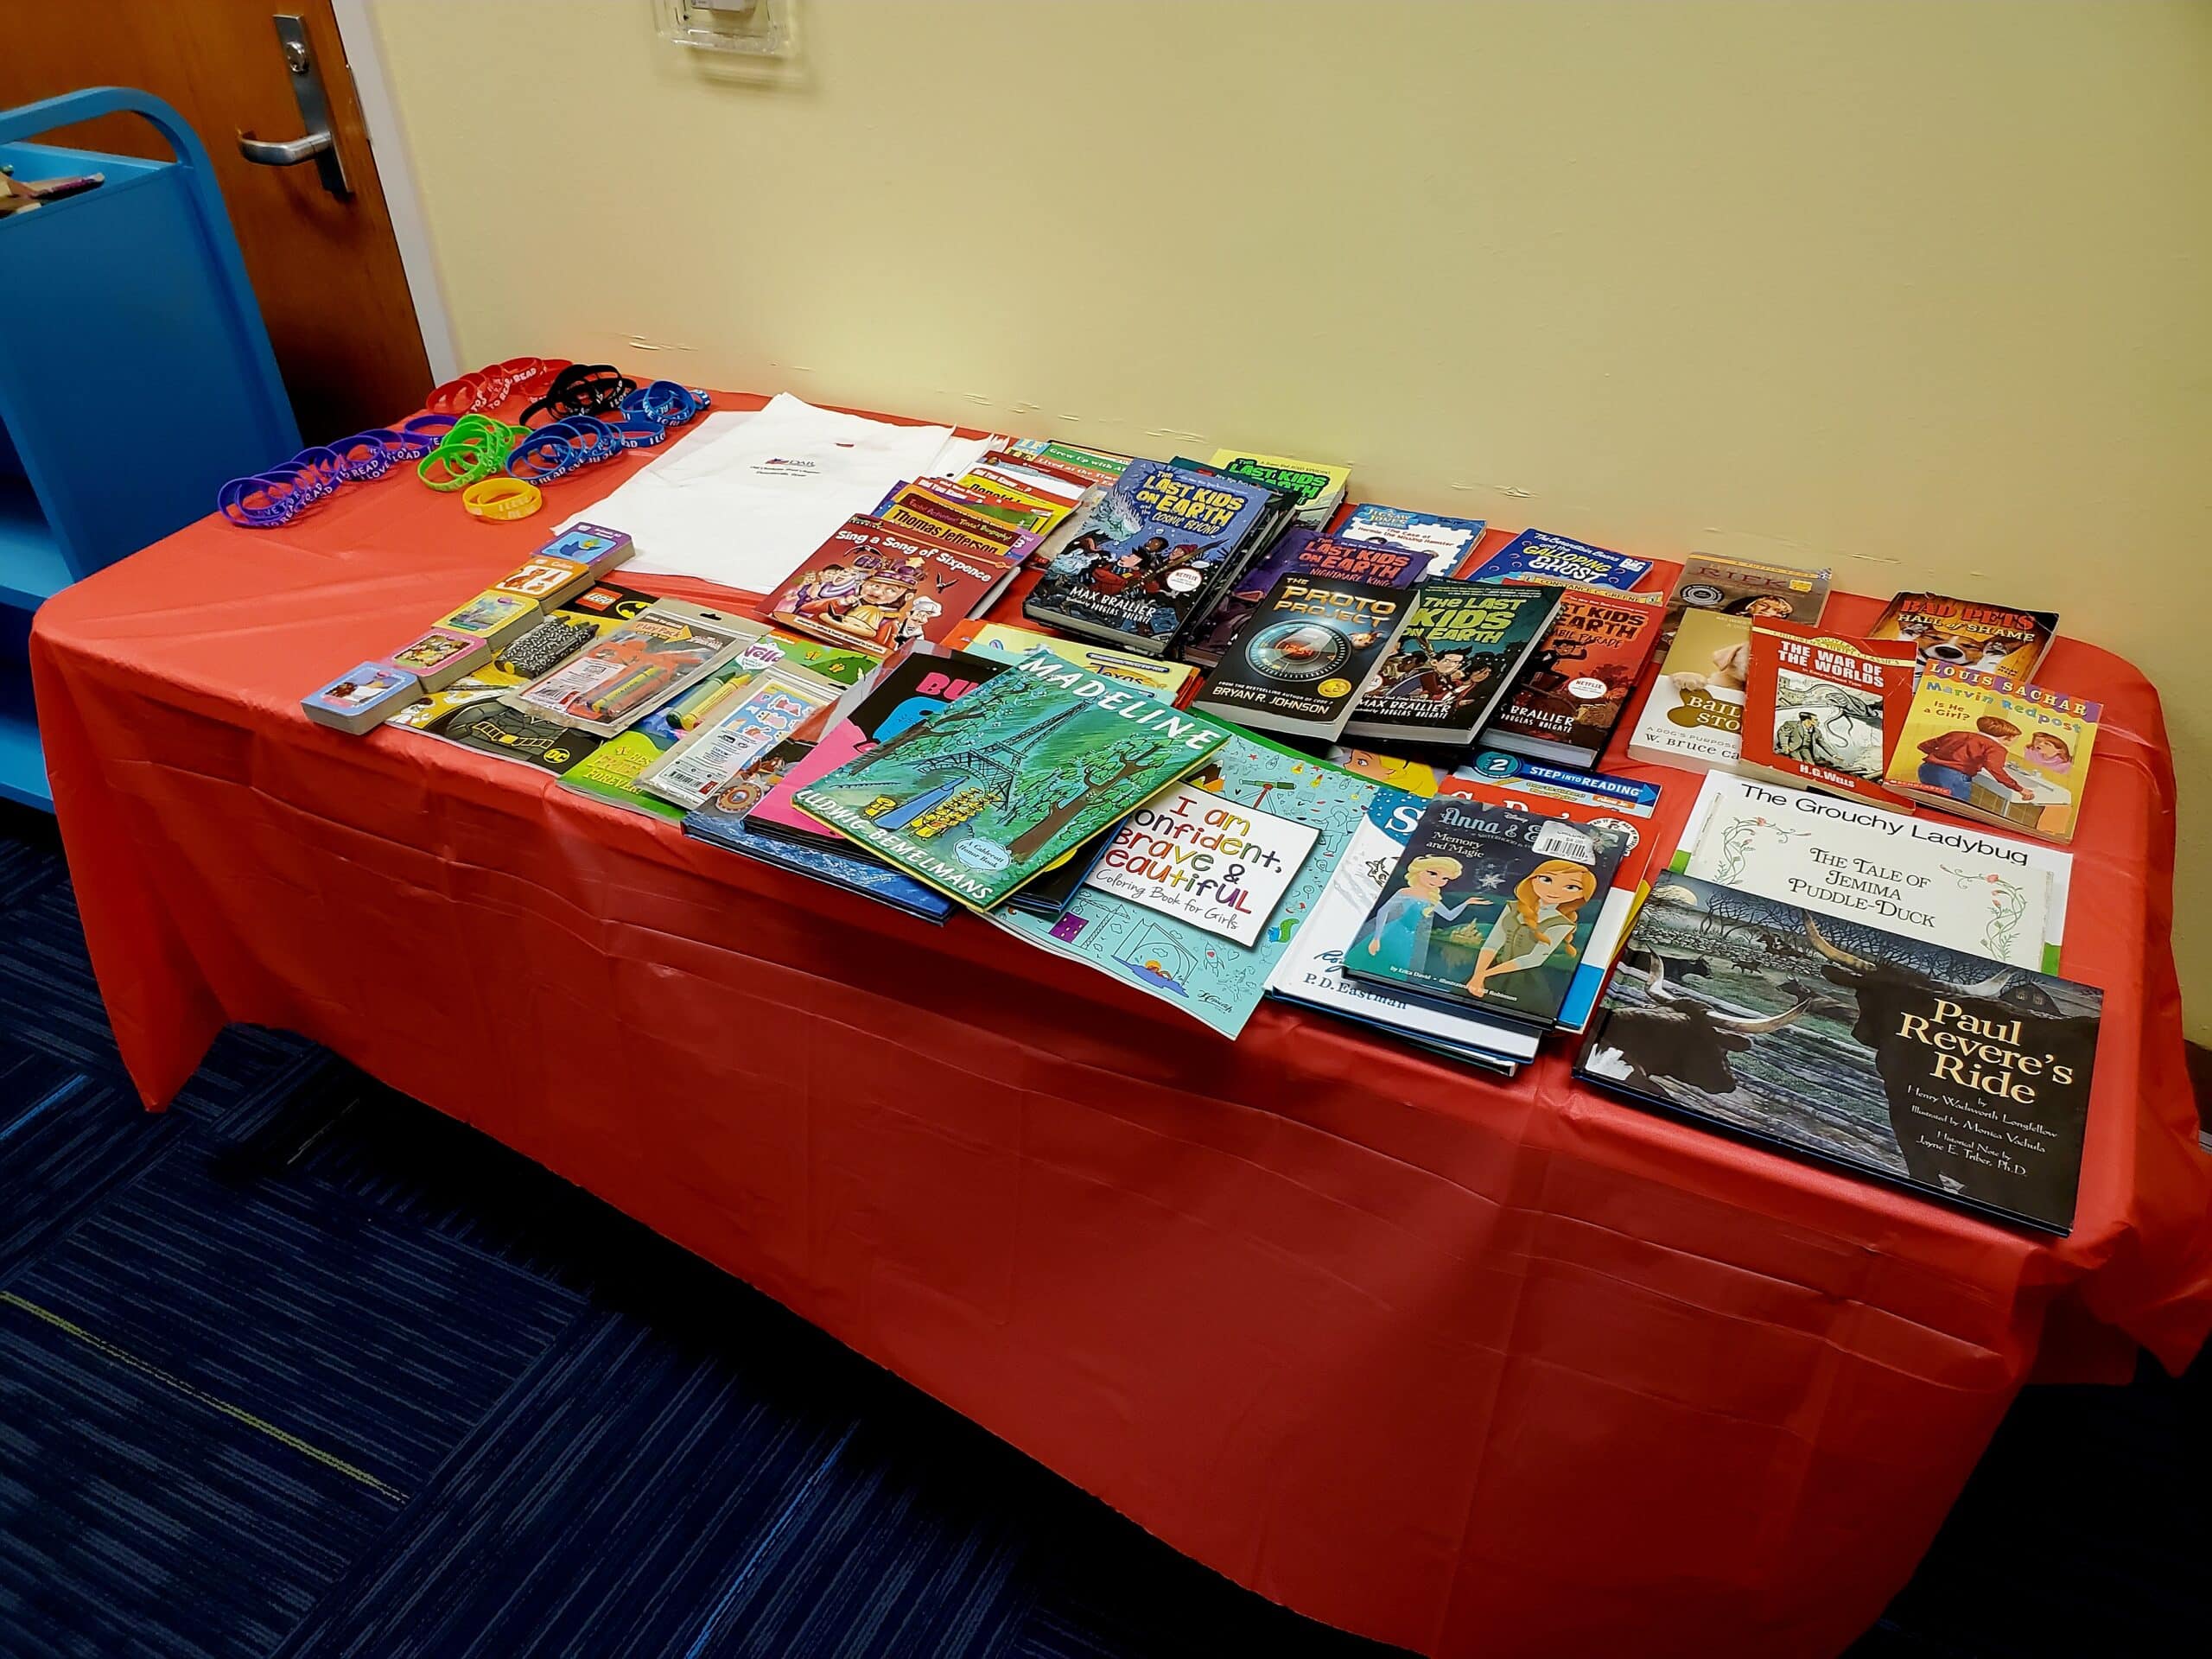 Books donated to Duncanville Public Library